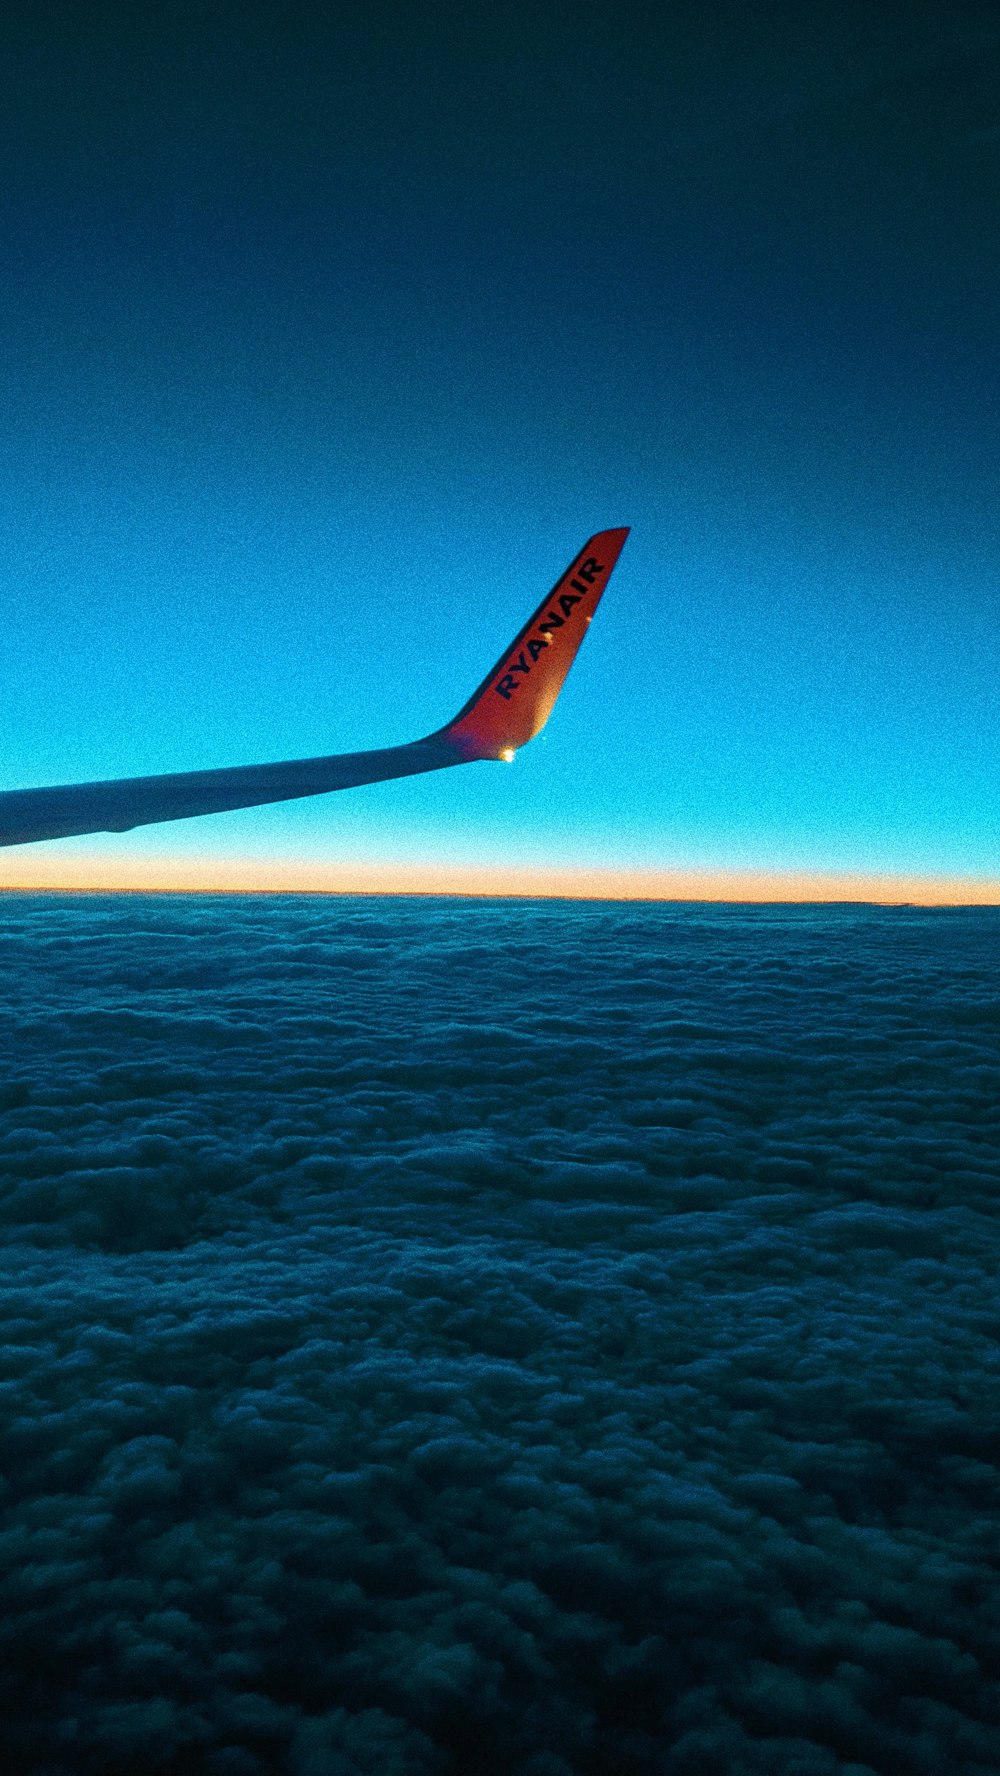 airplane wing over the sea during daytime